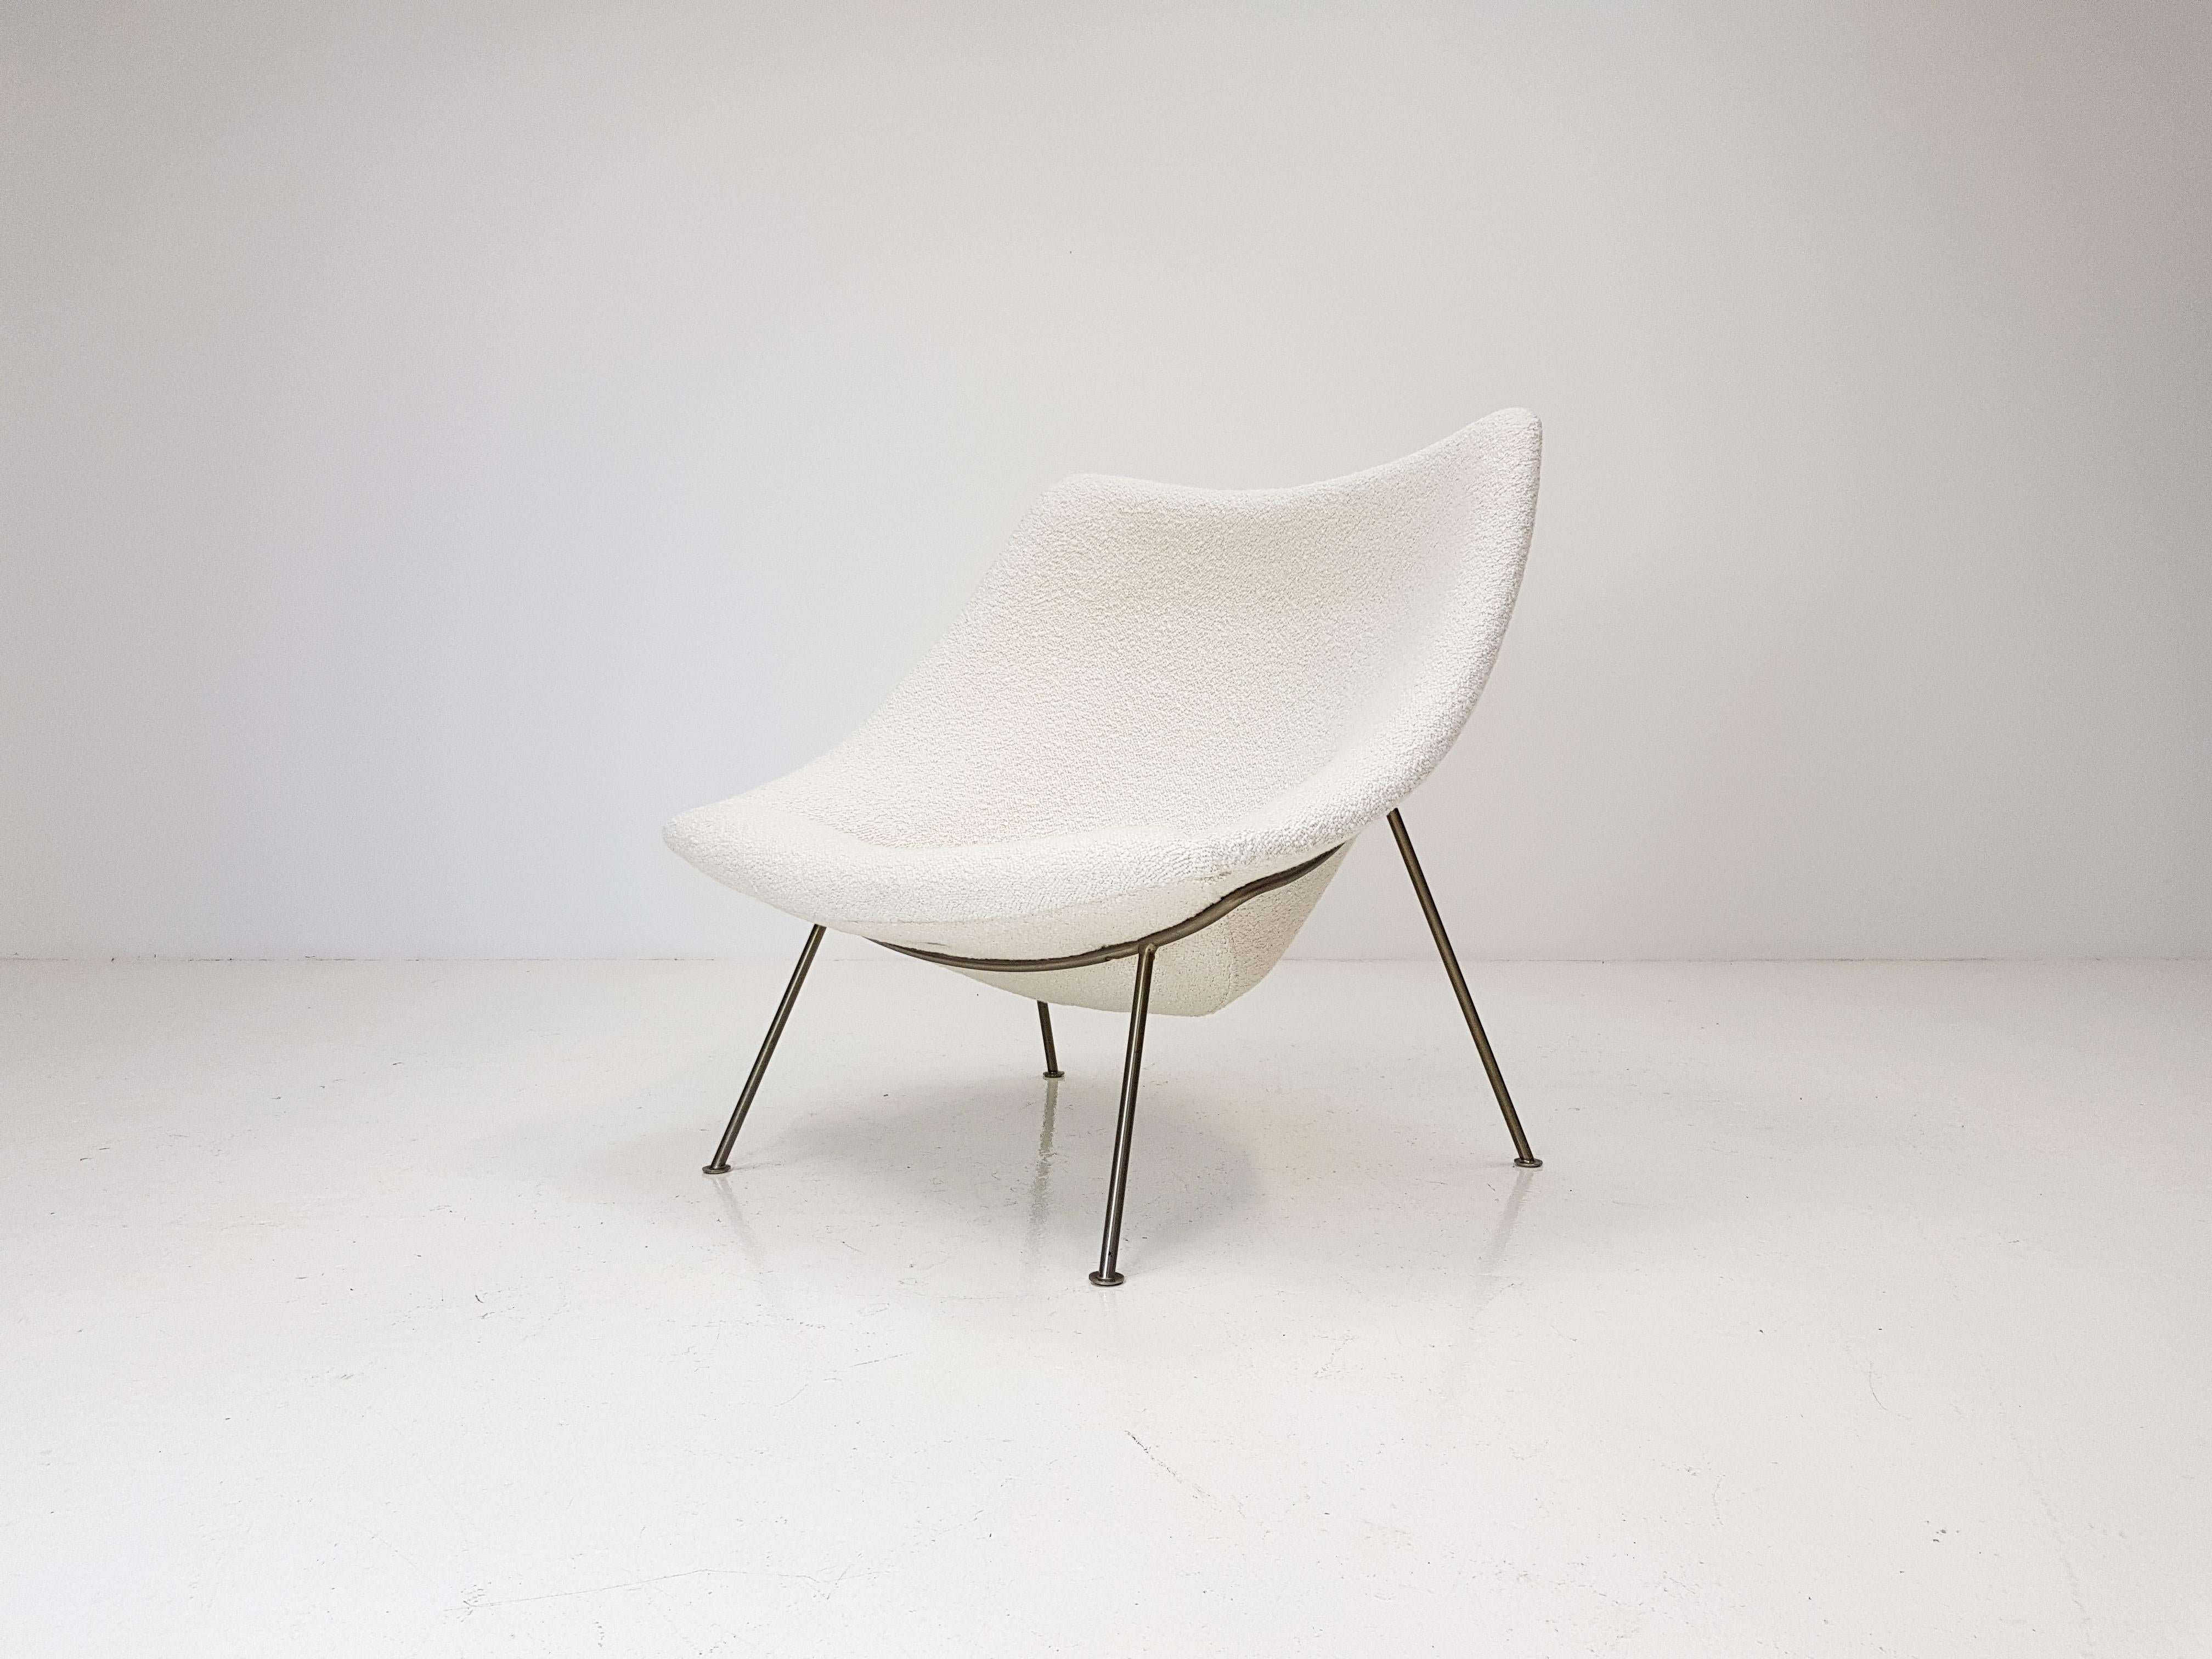 A large 1960s Pierre Paulin oyster chair reupholstered in Dedar Milano bouclé fabric. Produced by Artifort, Netherlands.

As the piece is fully reupholstered it is in fine condition and the bouclé fabric elevates this already fine and elegant